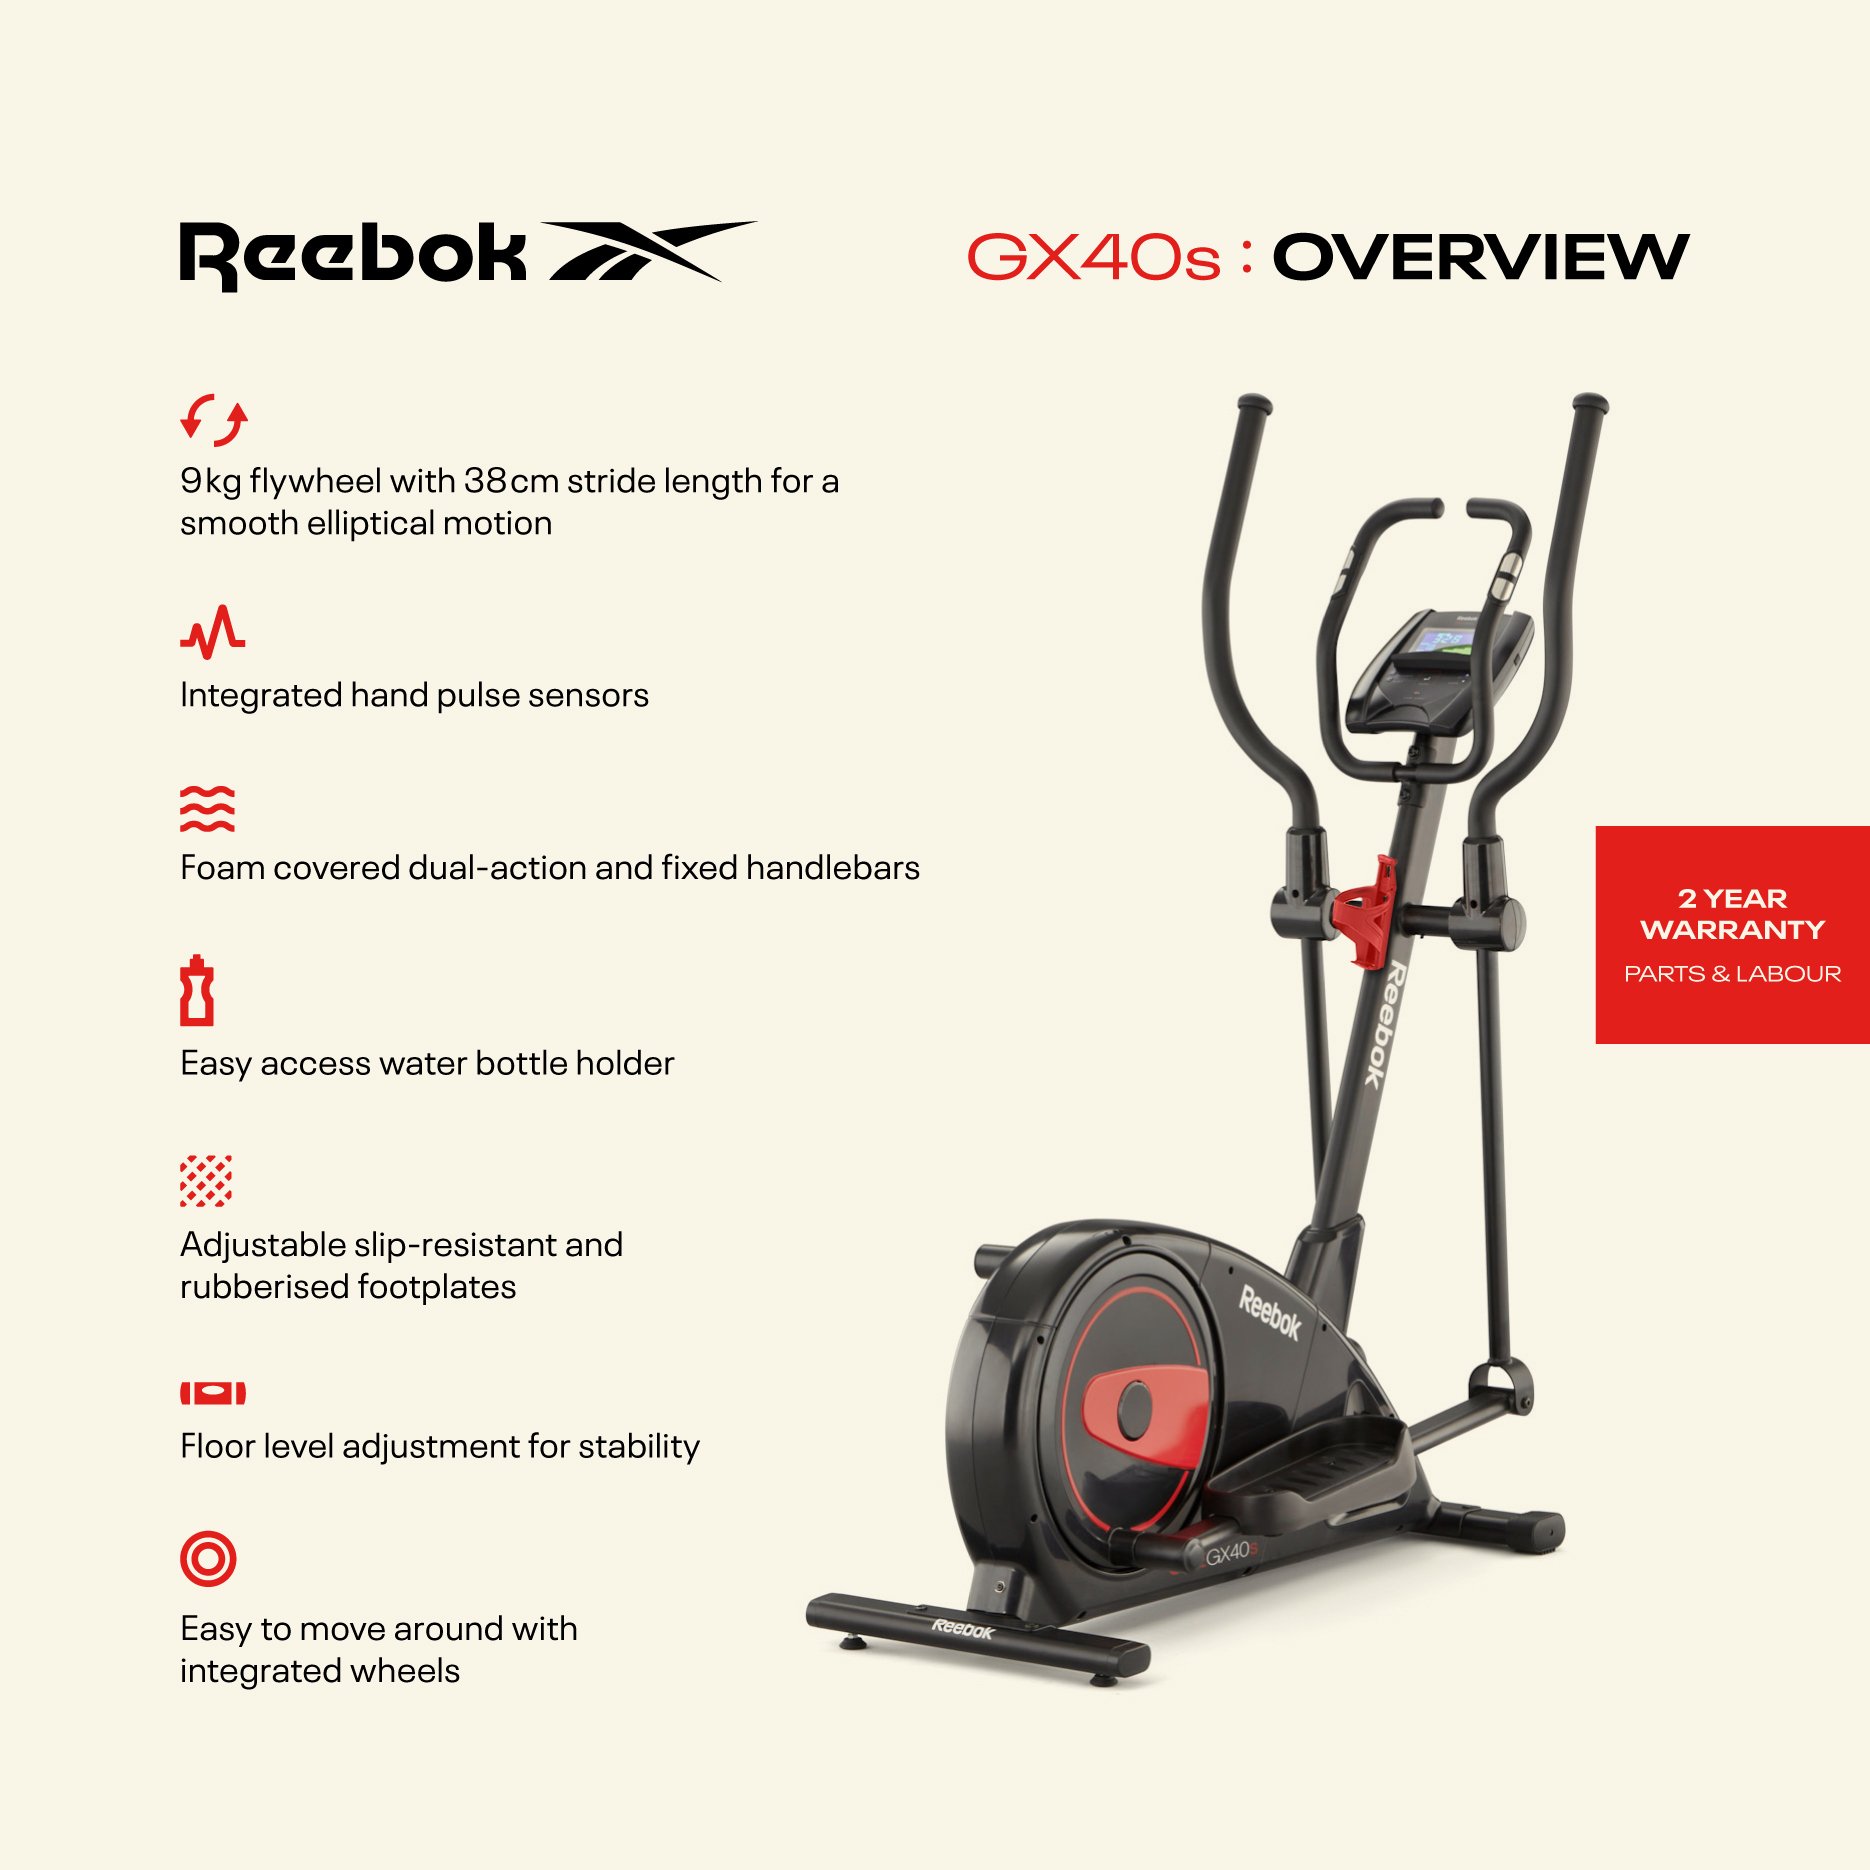 Reebok Gx40s One Electronic Cross Trainer Review | peacecommission.kdsg ...